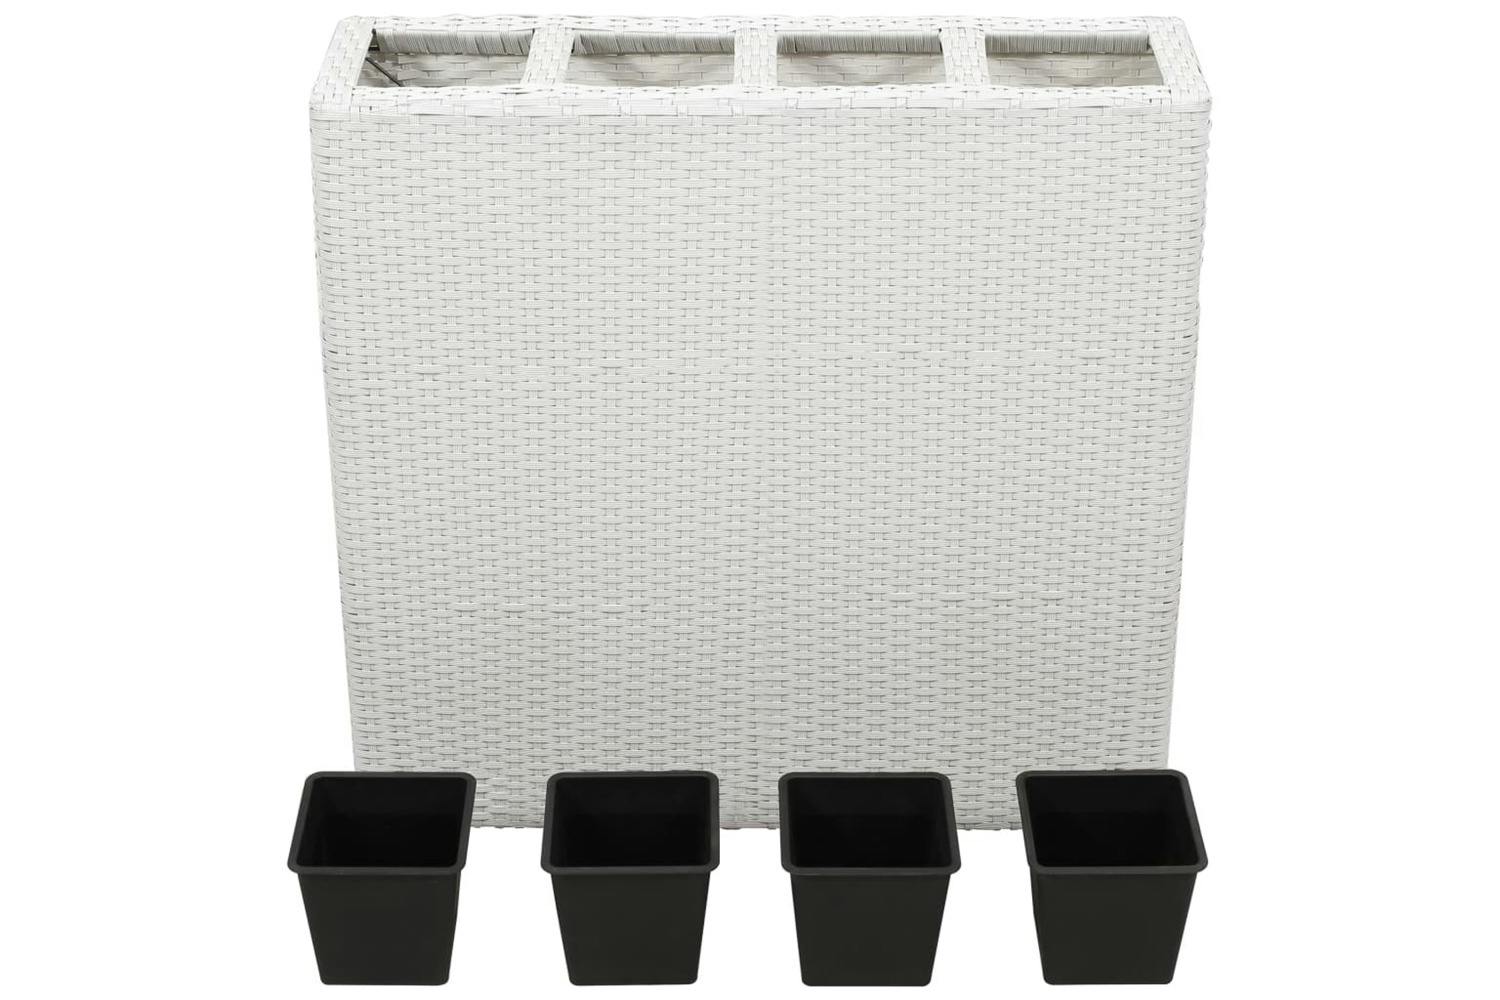 Vidaxl 45427 Garden Raised Bed With 4 Pots Poly Rattan White